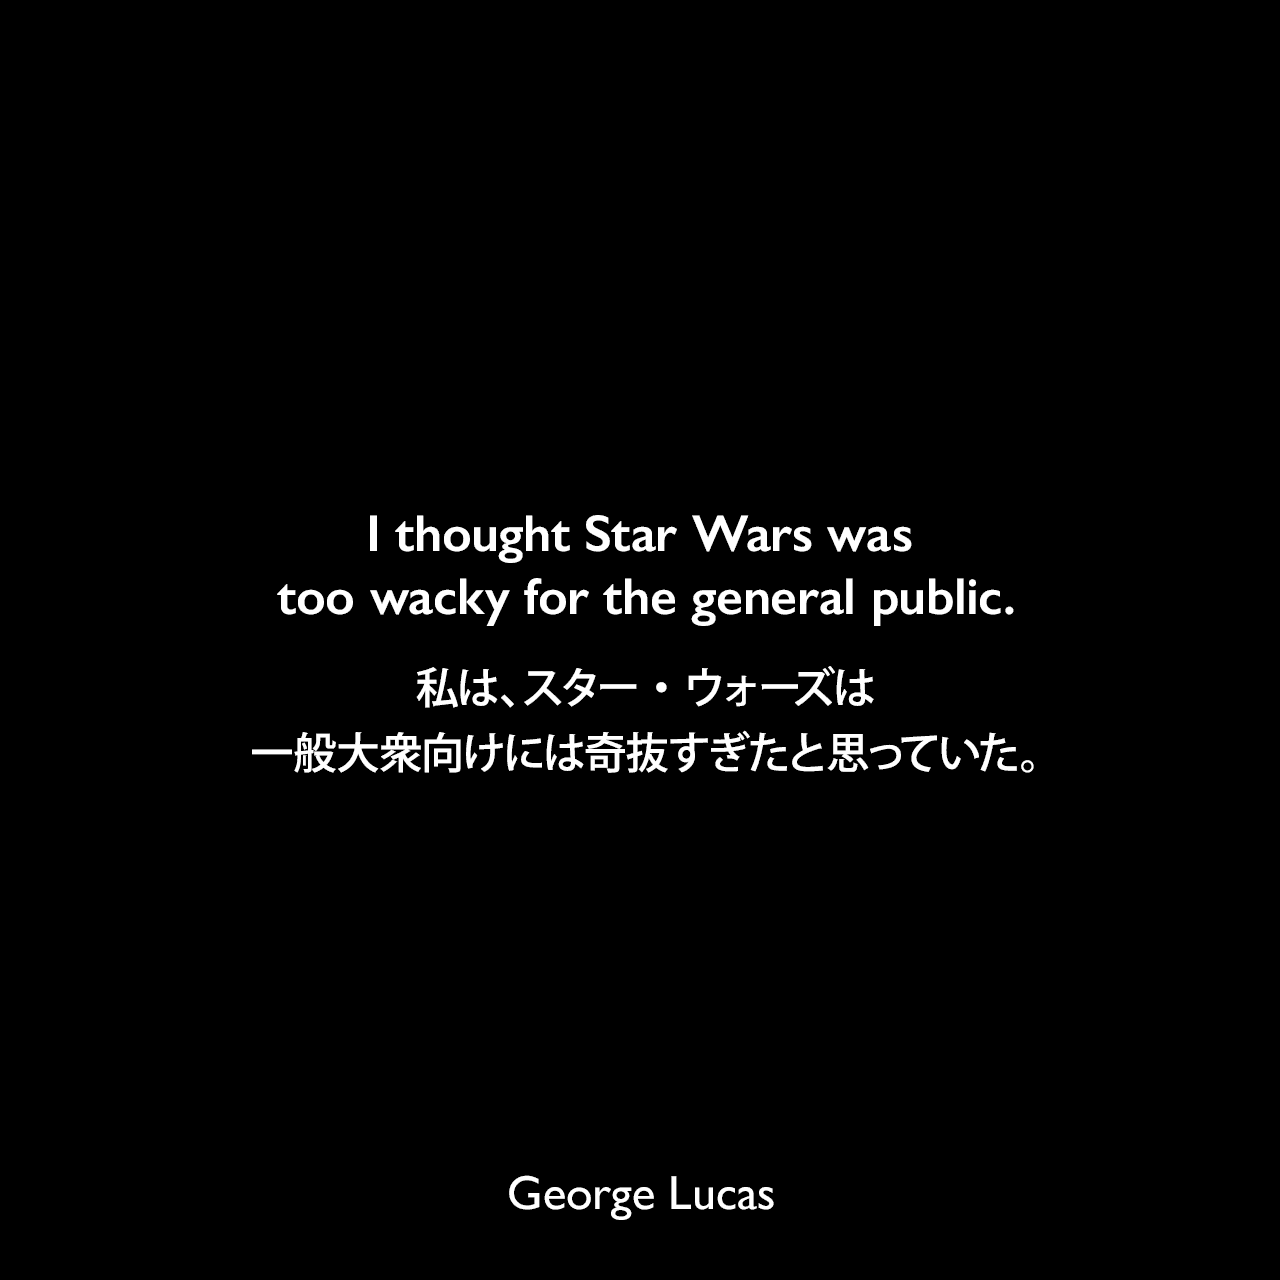 I thought Star Wars was too wacky for the general public.私は、スター・ウォーズは一般大衆向けには奇抜すぎたと思っていた。George Lucas